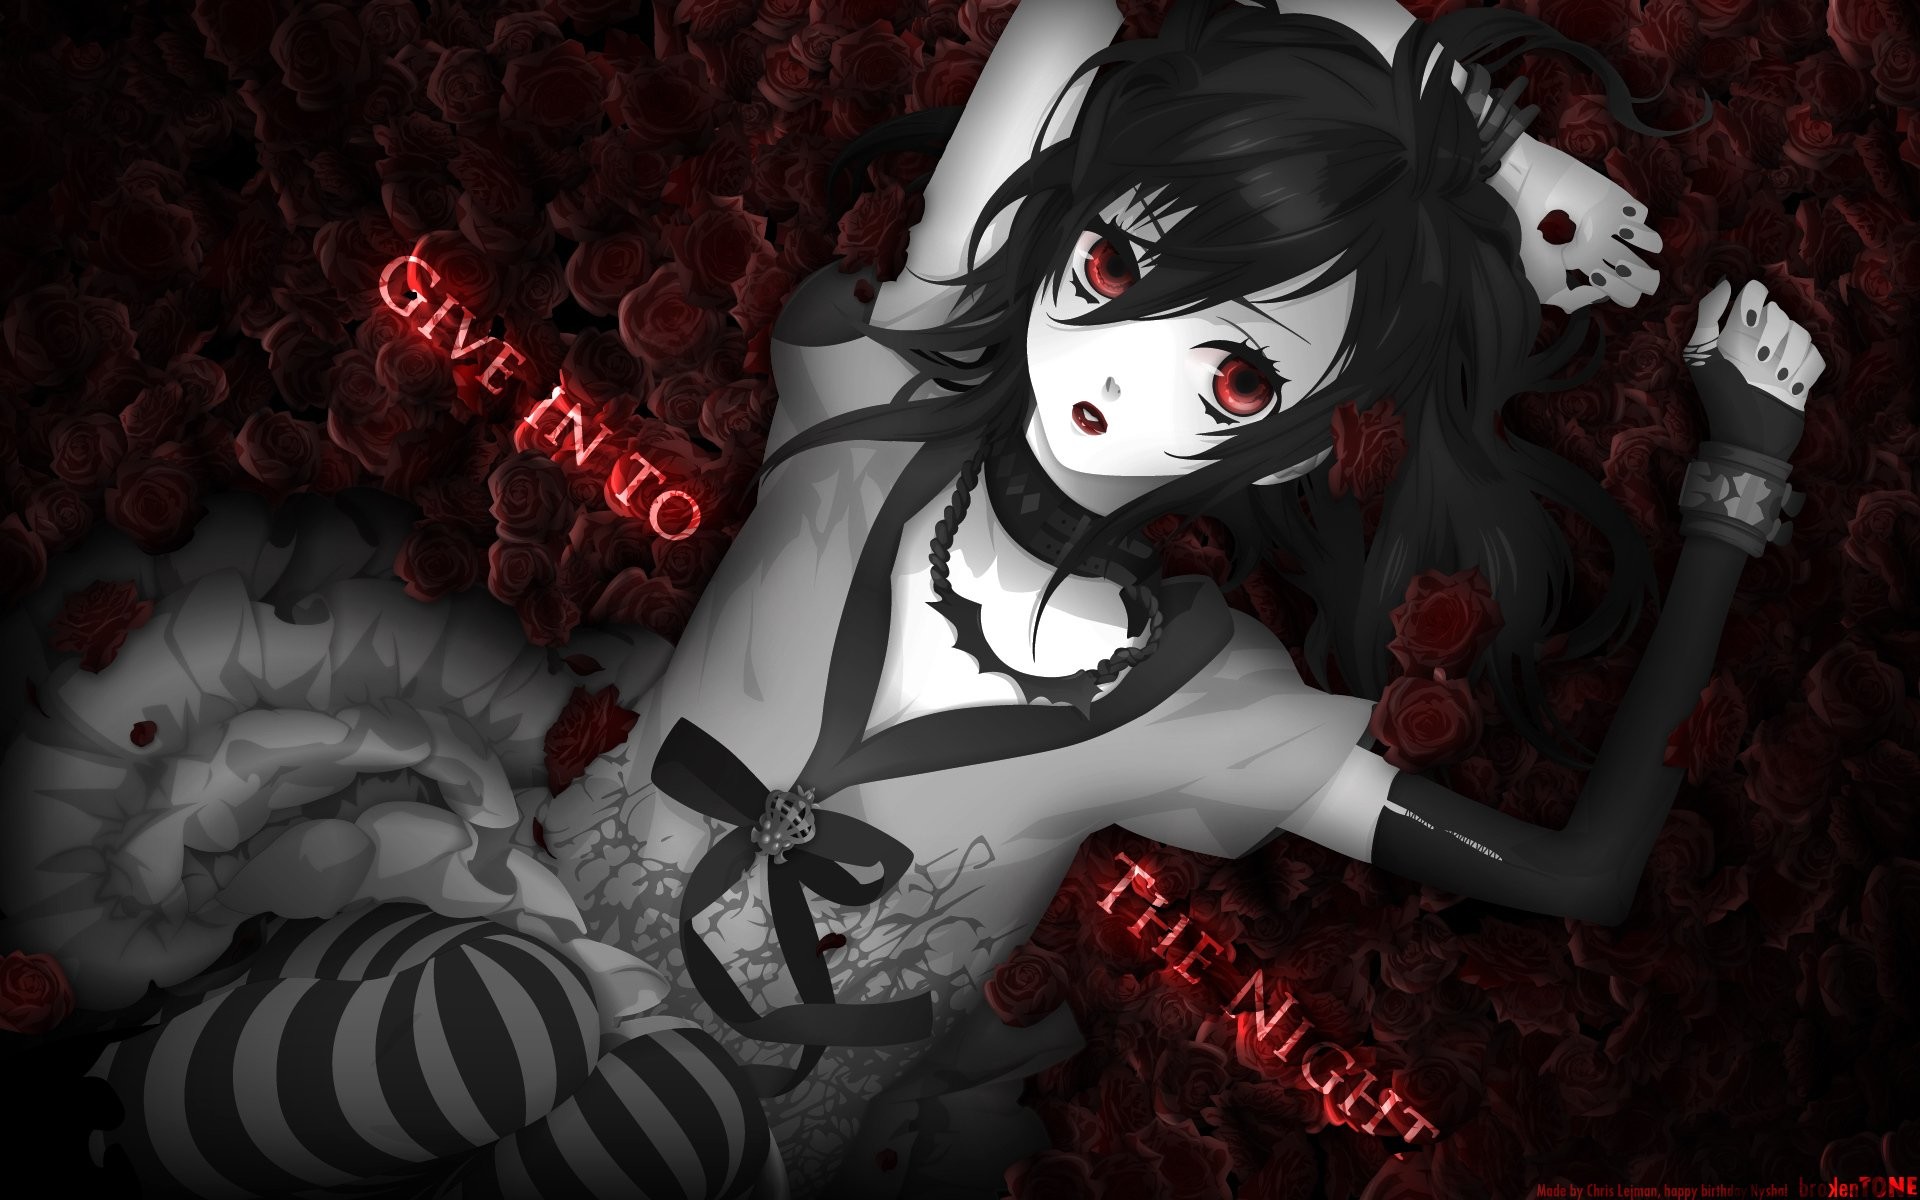 anime vampire girl with red eyes